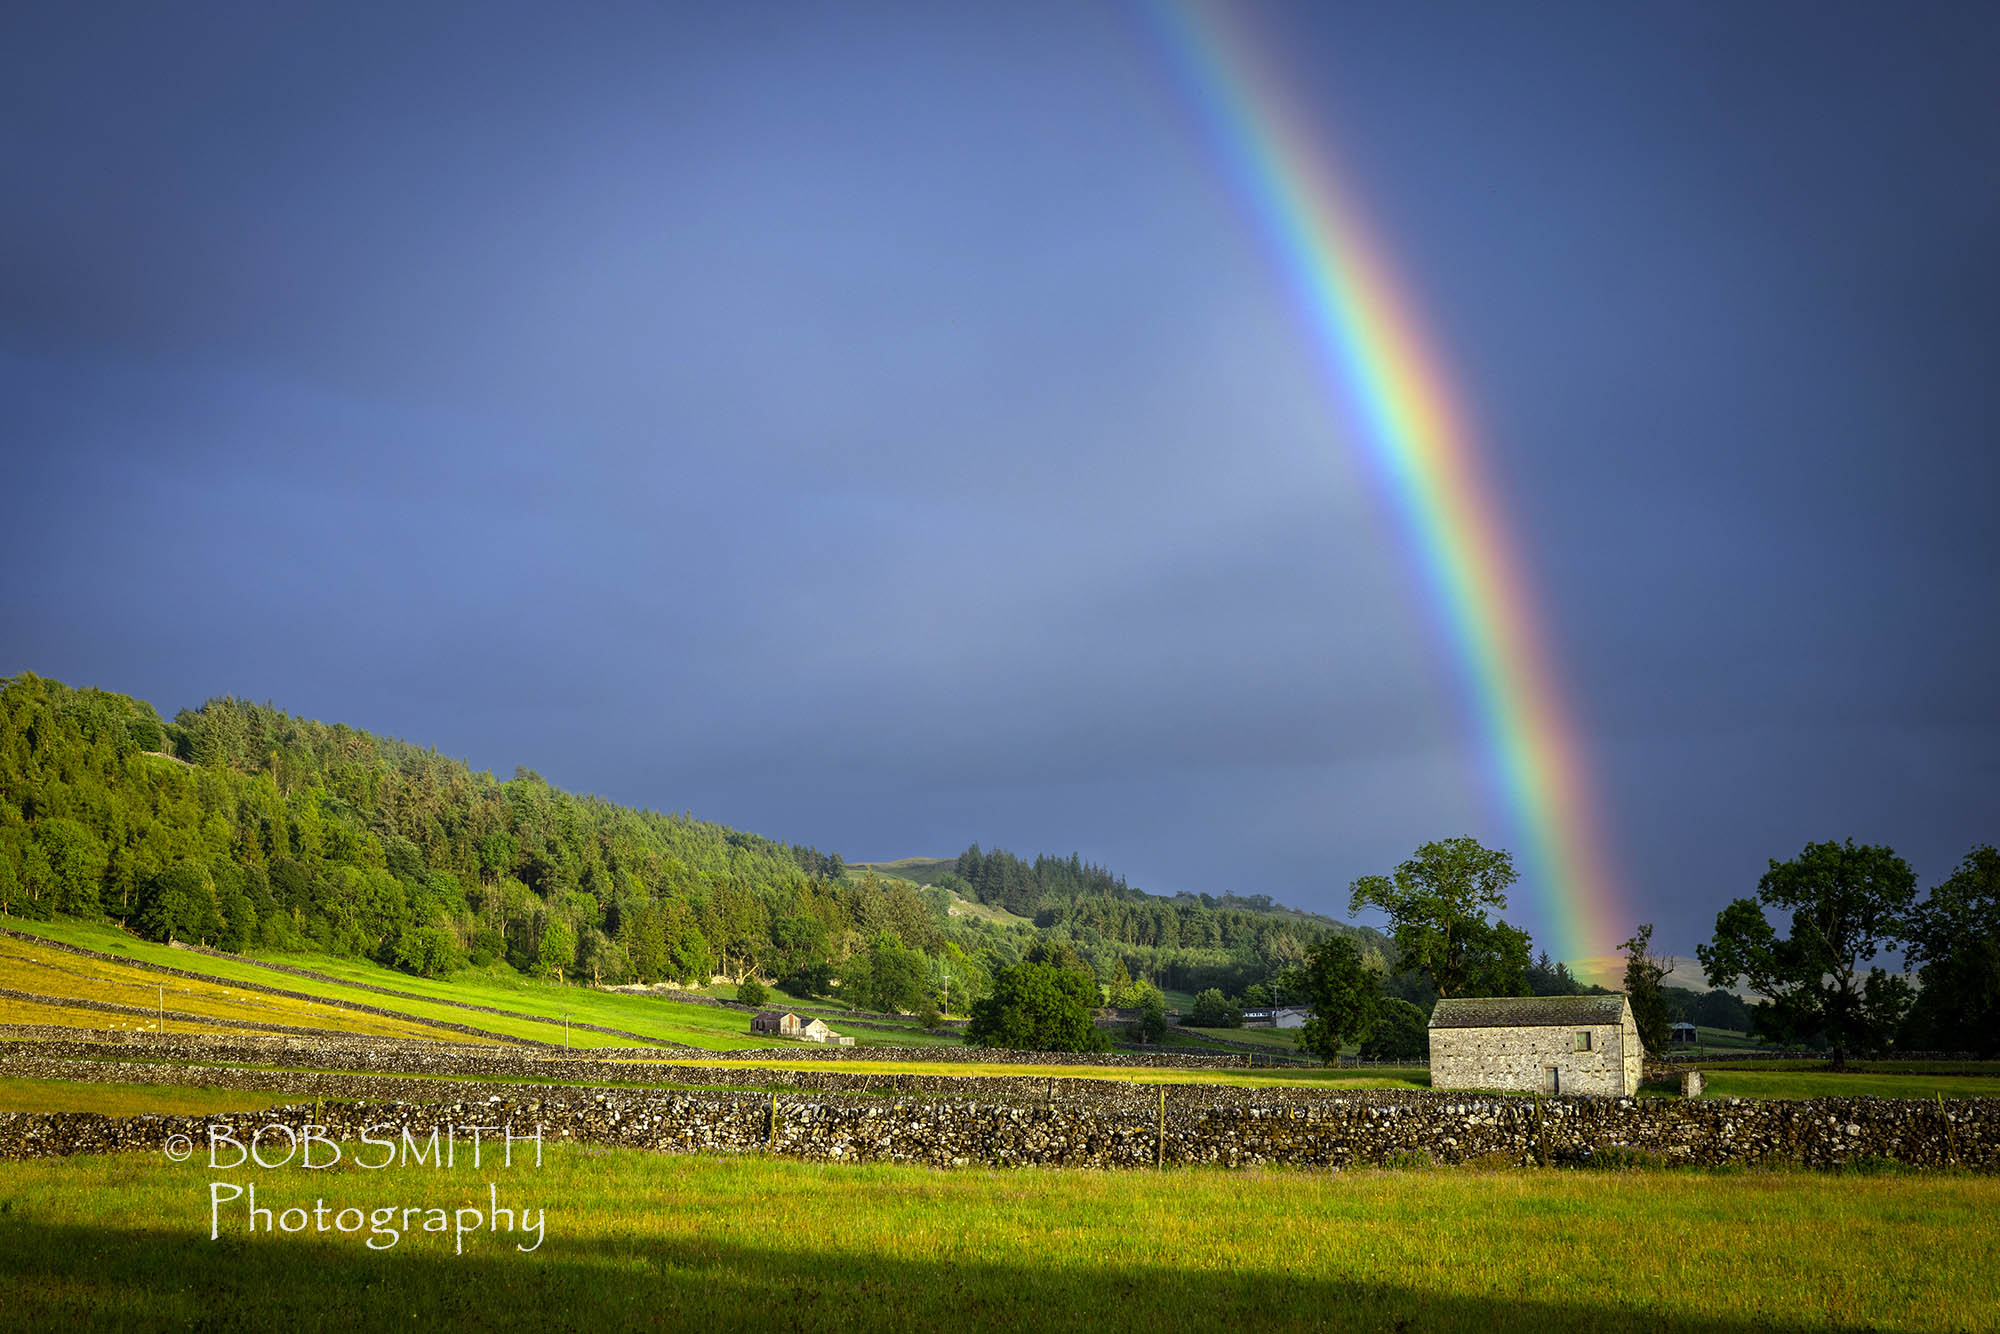 A late evening rainbow in the Yorkshire Dales